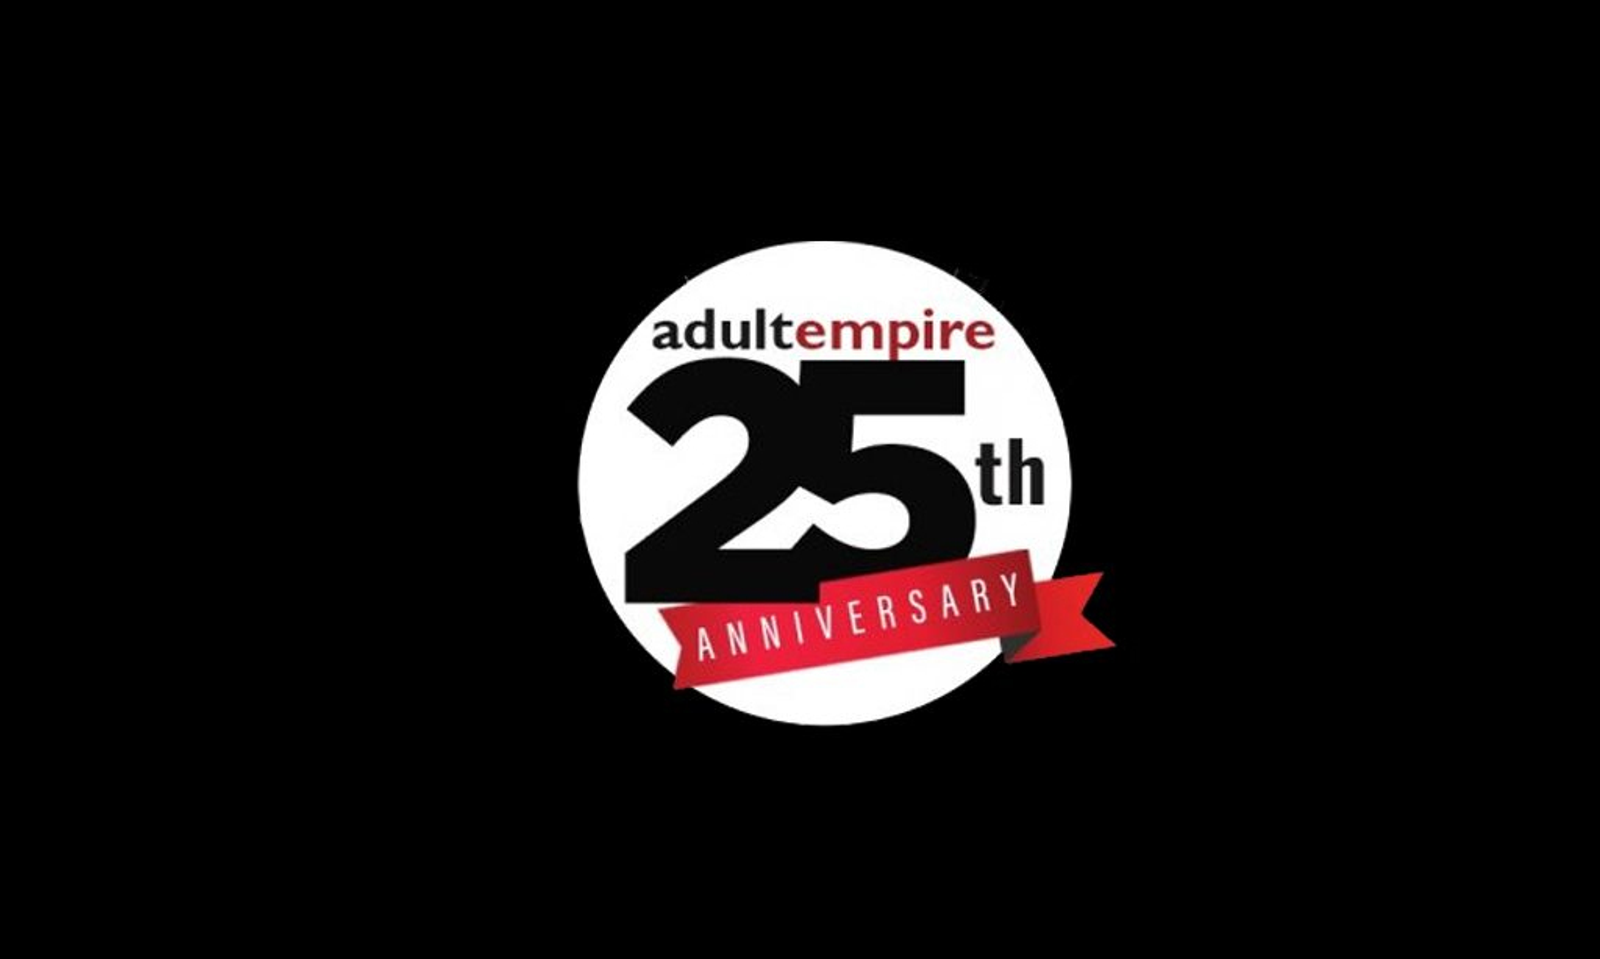 Adult Empire Launches Month of Celebration for 25th Anniversary